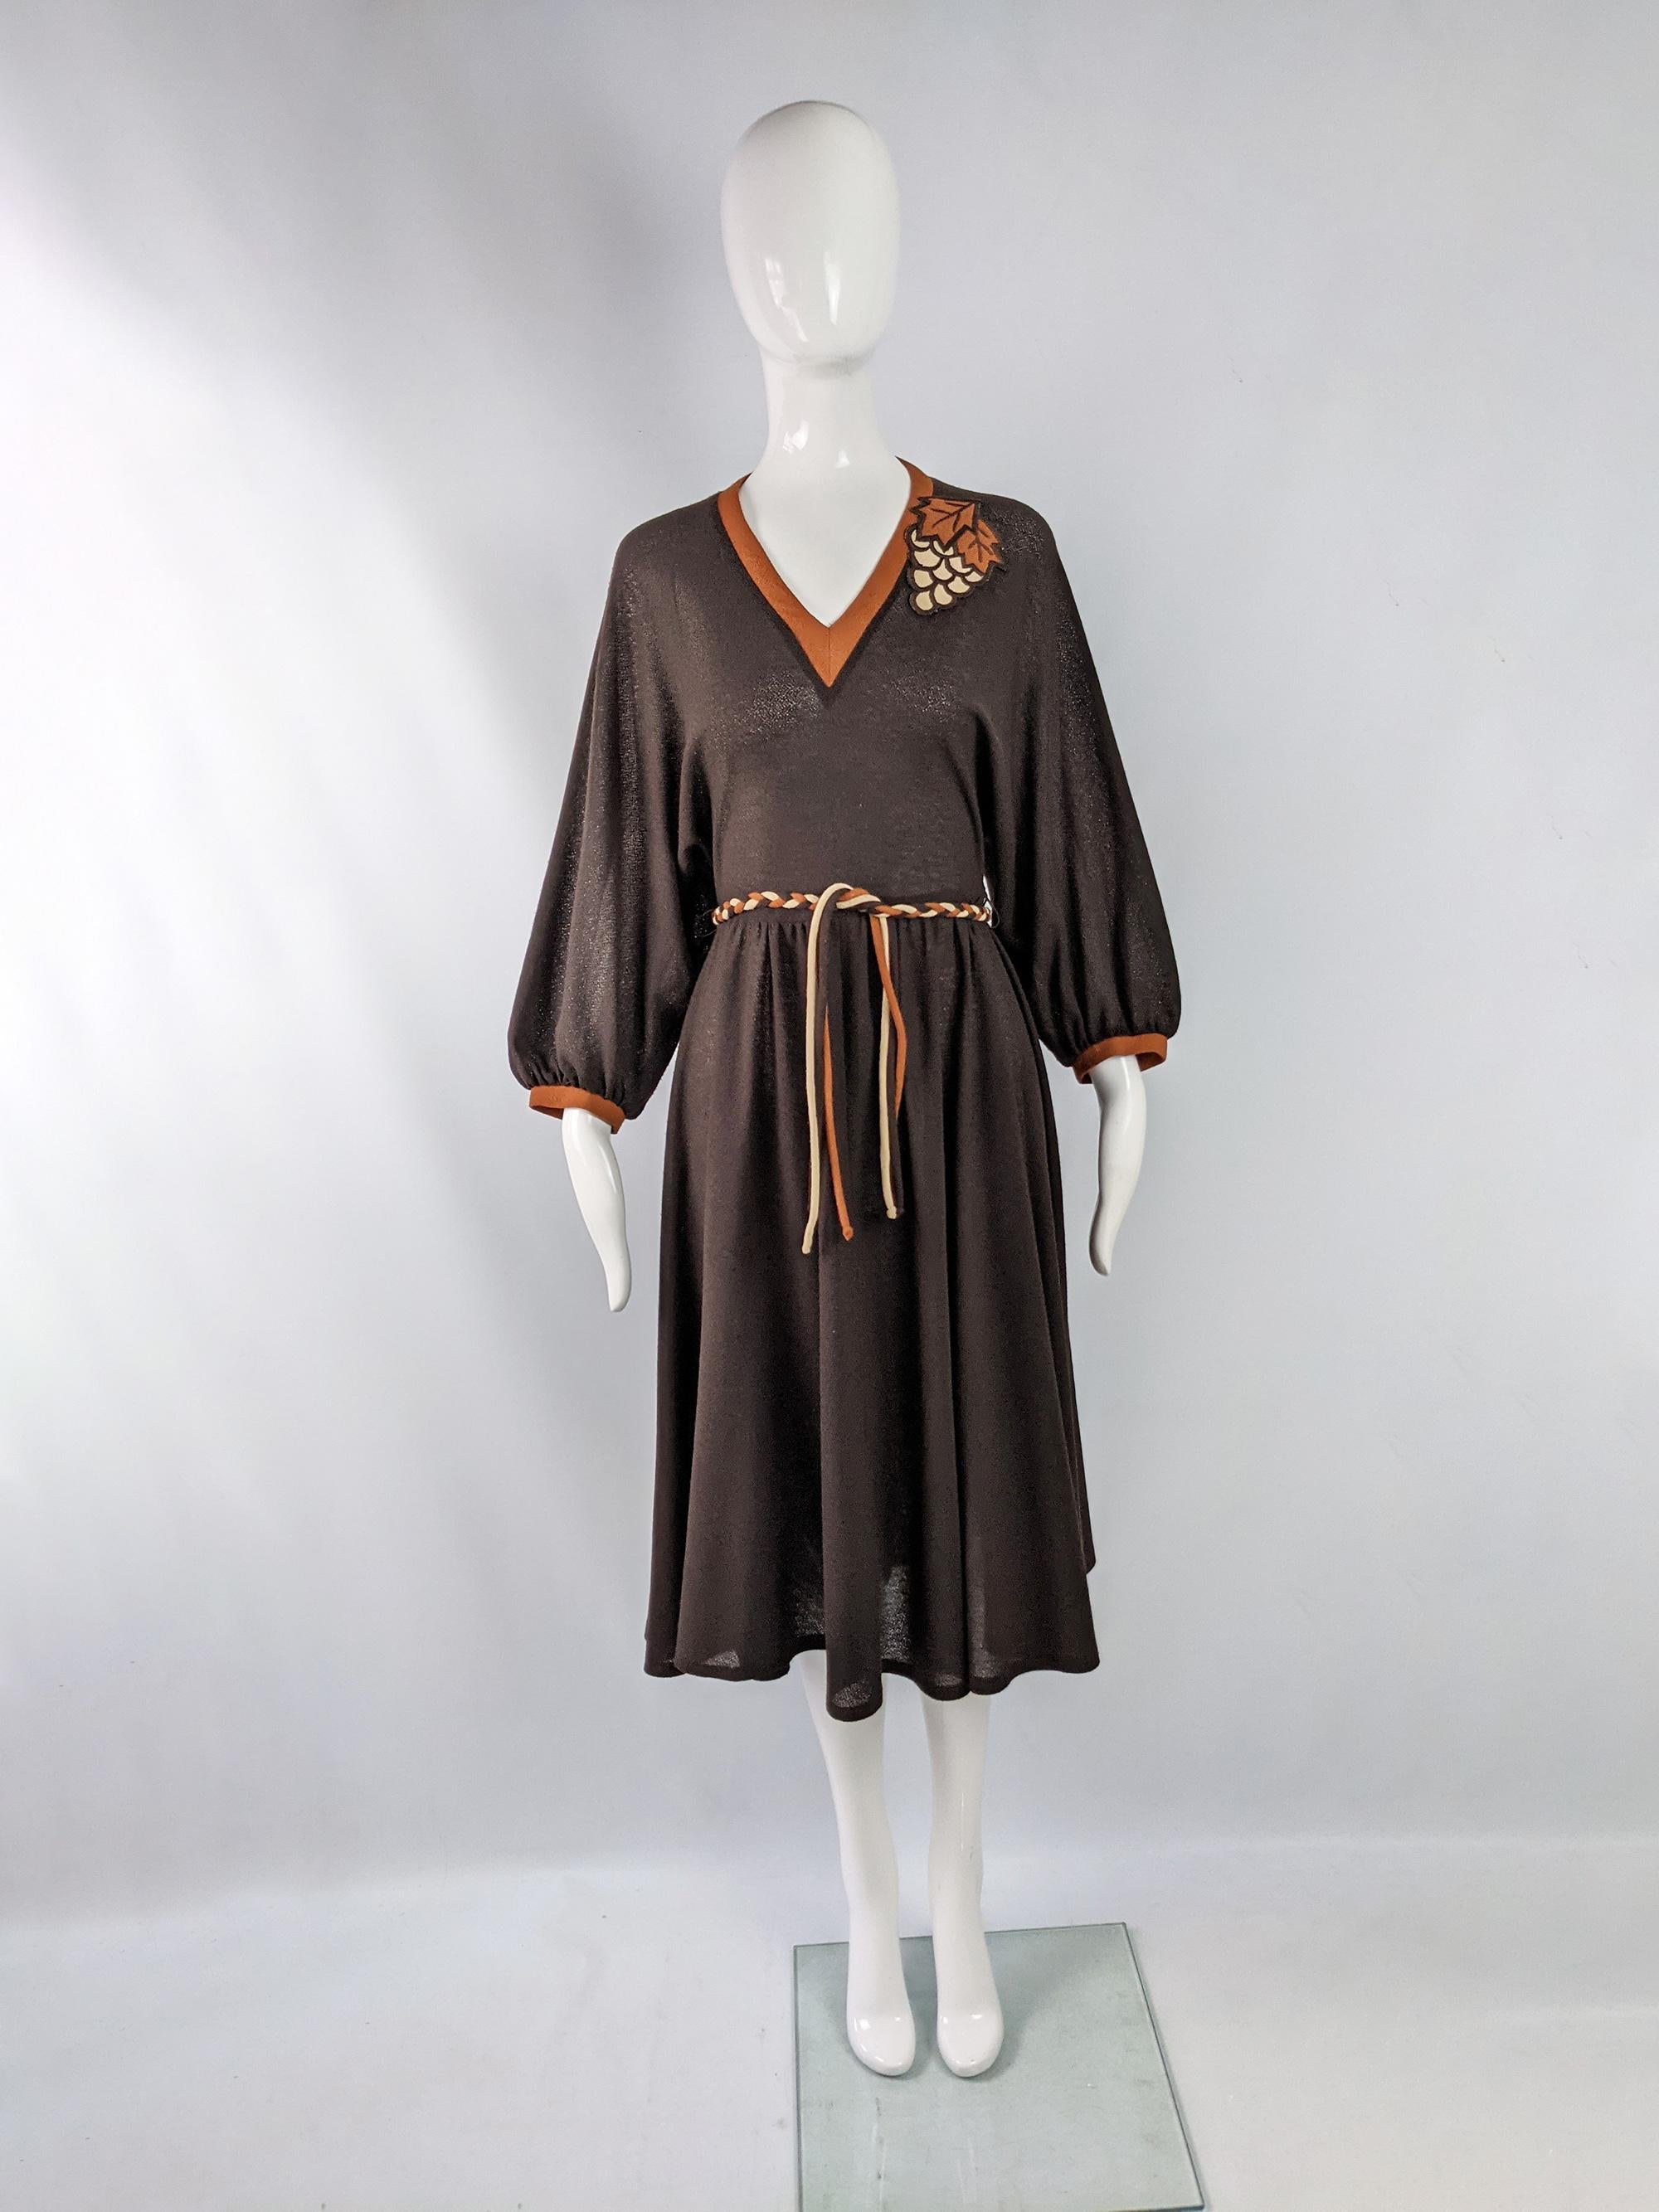 A fun and cute vintage womens dress from the 70s by quality English label, Liza Peta. In a brown, sheer crepe fabric with puffed dolman sleeves, a loose fit on top and a sweet grape embroidered applique on the shoulder.

Size: Marked vintage 12 but